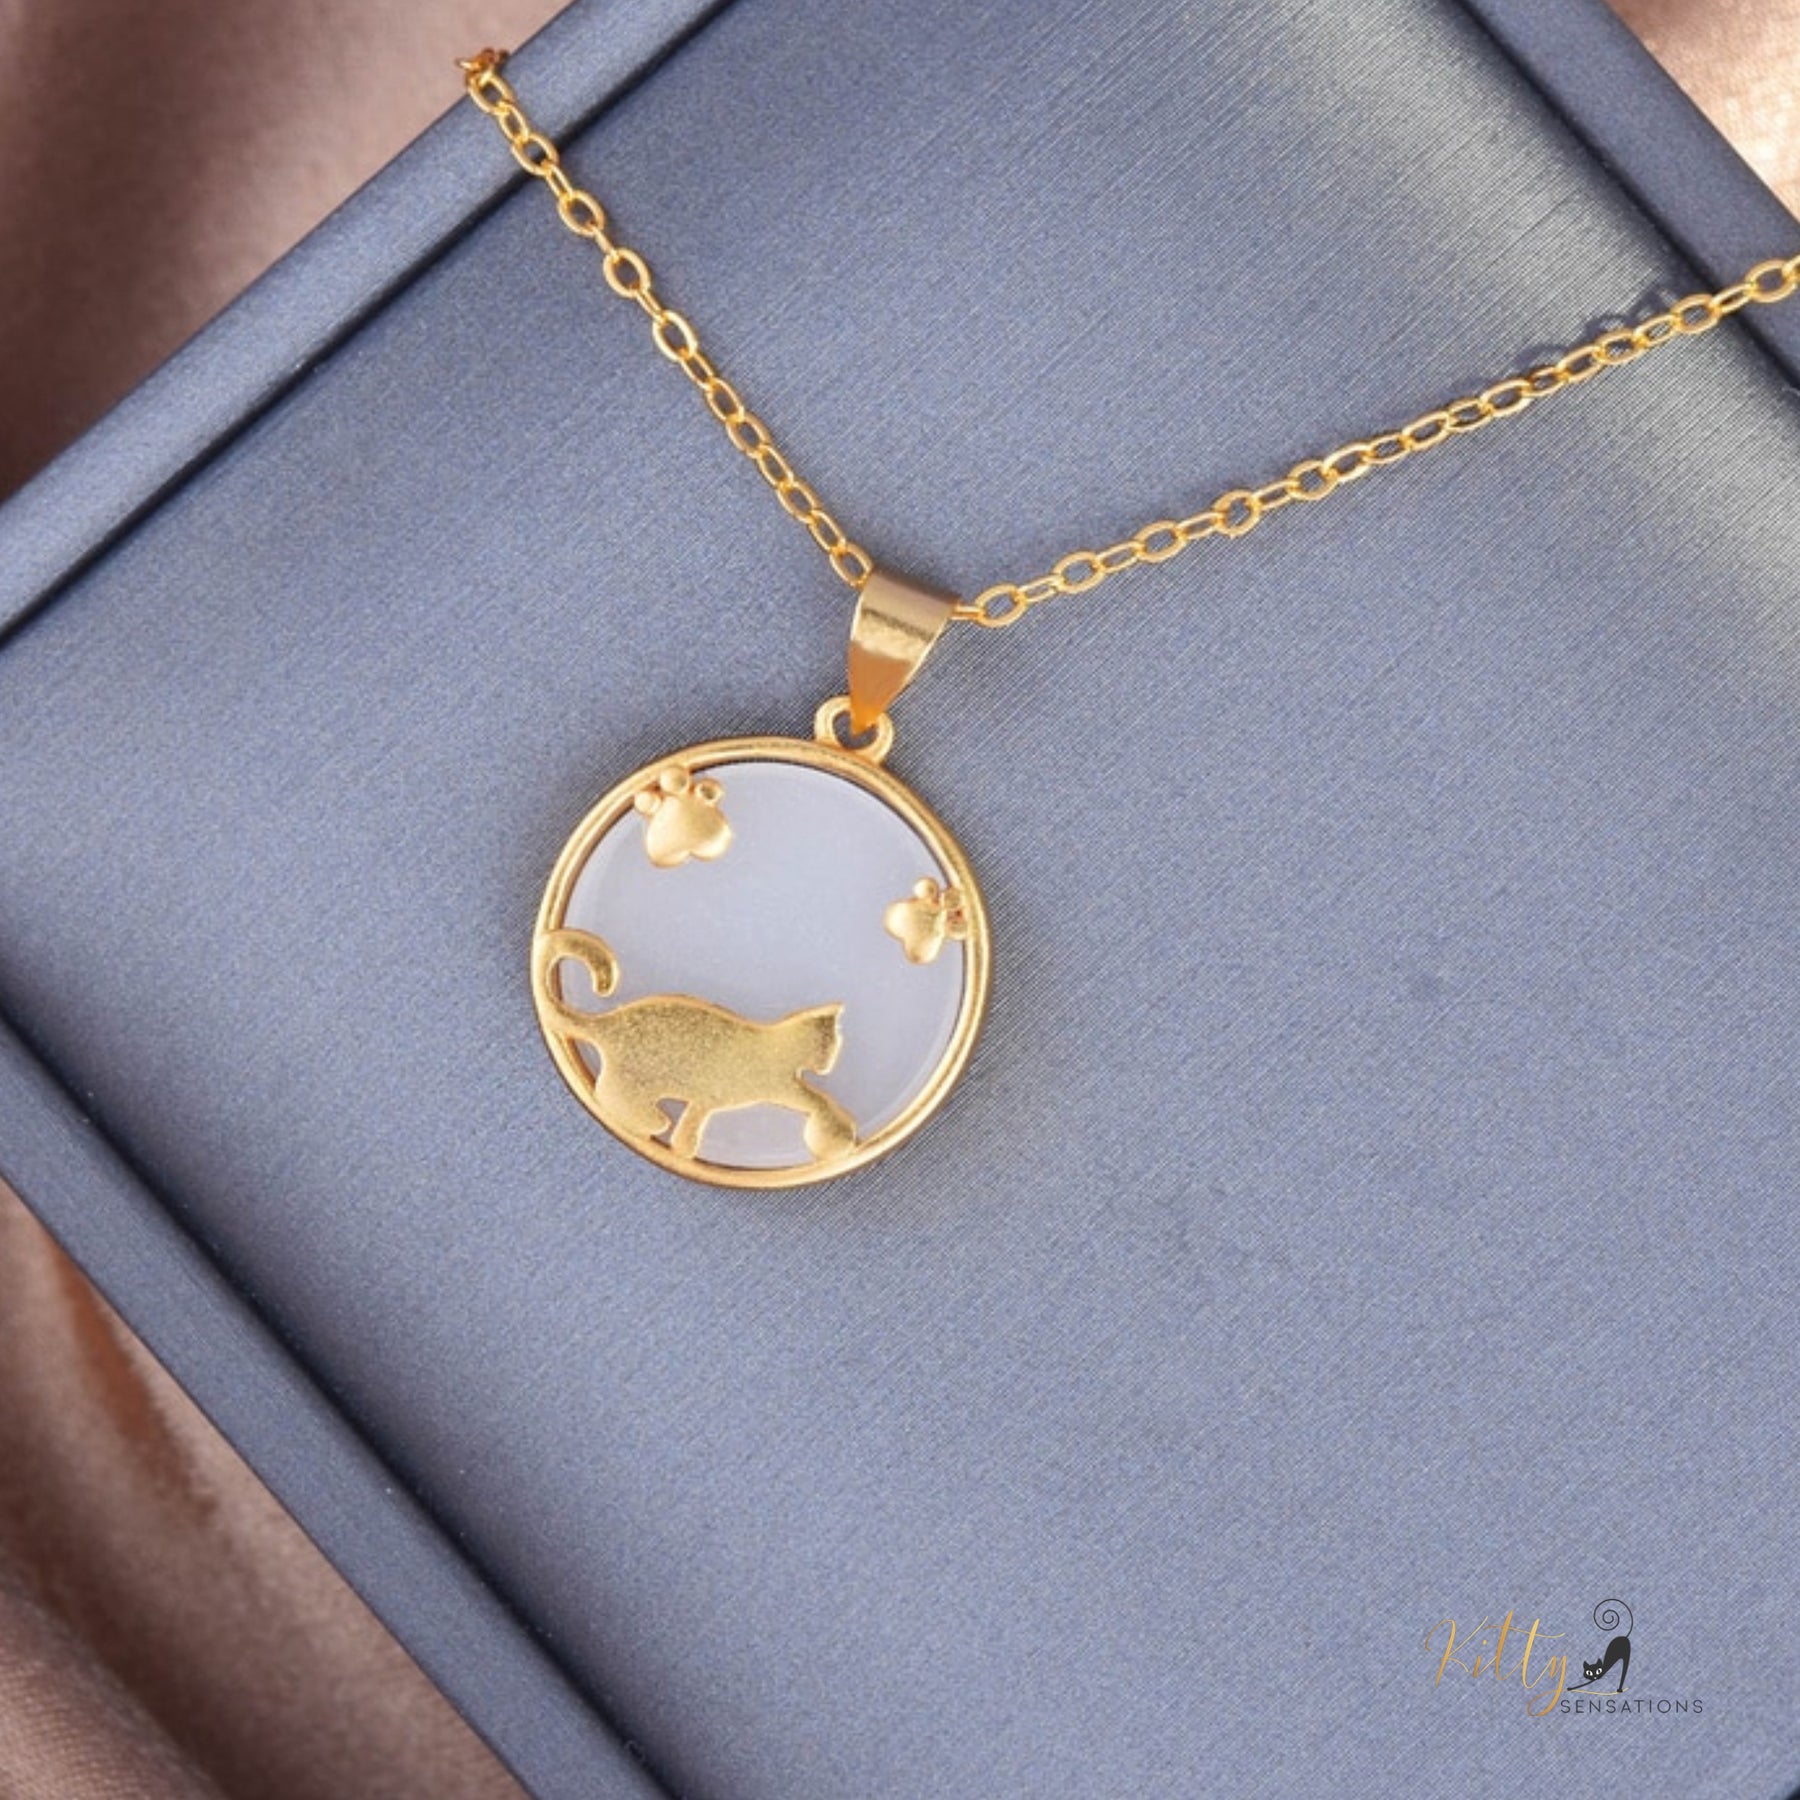 Playful Cat Natural Jade Necklace in Solid 925 Sterling Silver (Gold Plated) ($48.32): https://www.kittysensations.com/products/playful-cat-natural-jade-necklace-in-solid-925-sterling-silver-gold-plated?_pos=2&_psq=PLAYFUL+CAT+JADE&_ss=e&_v=1.0